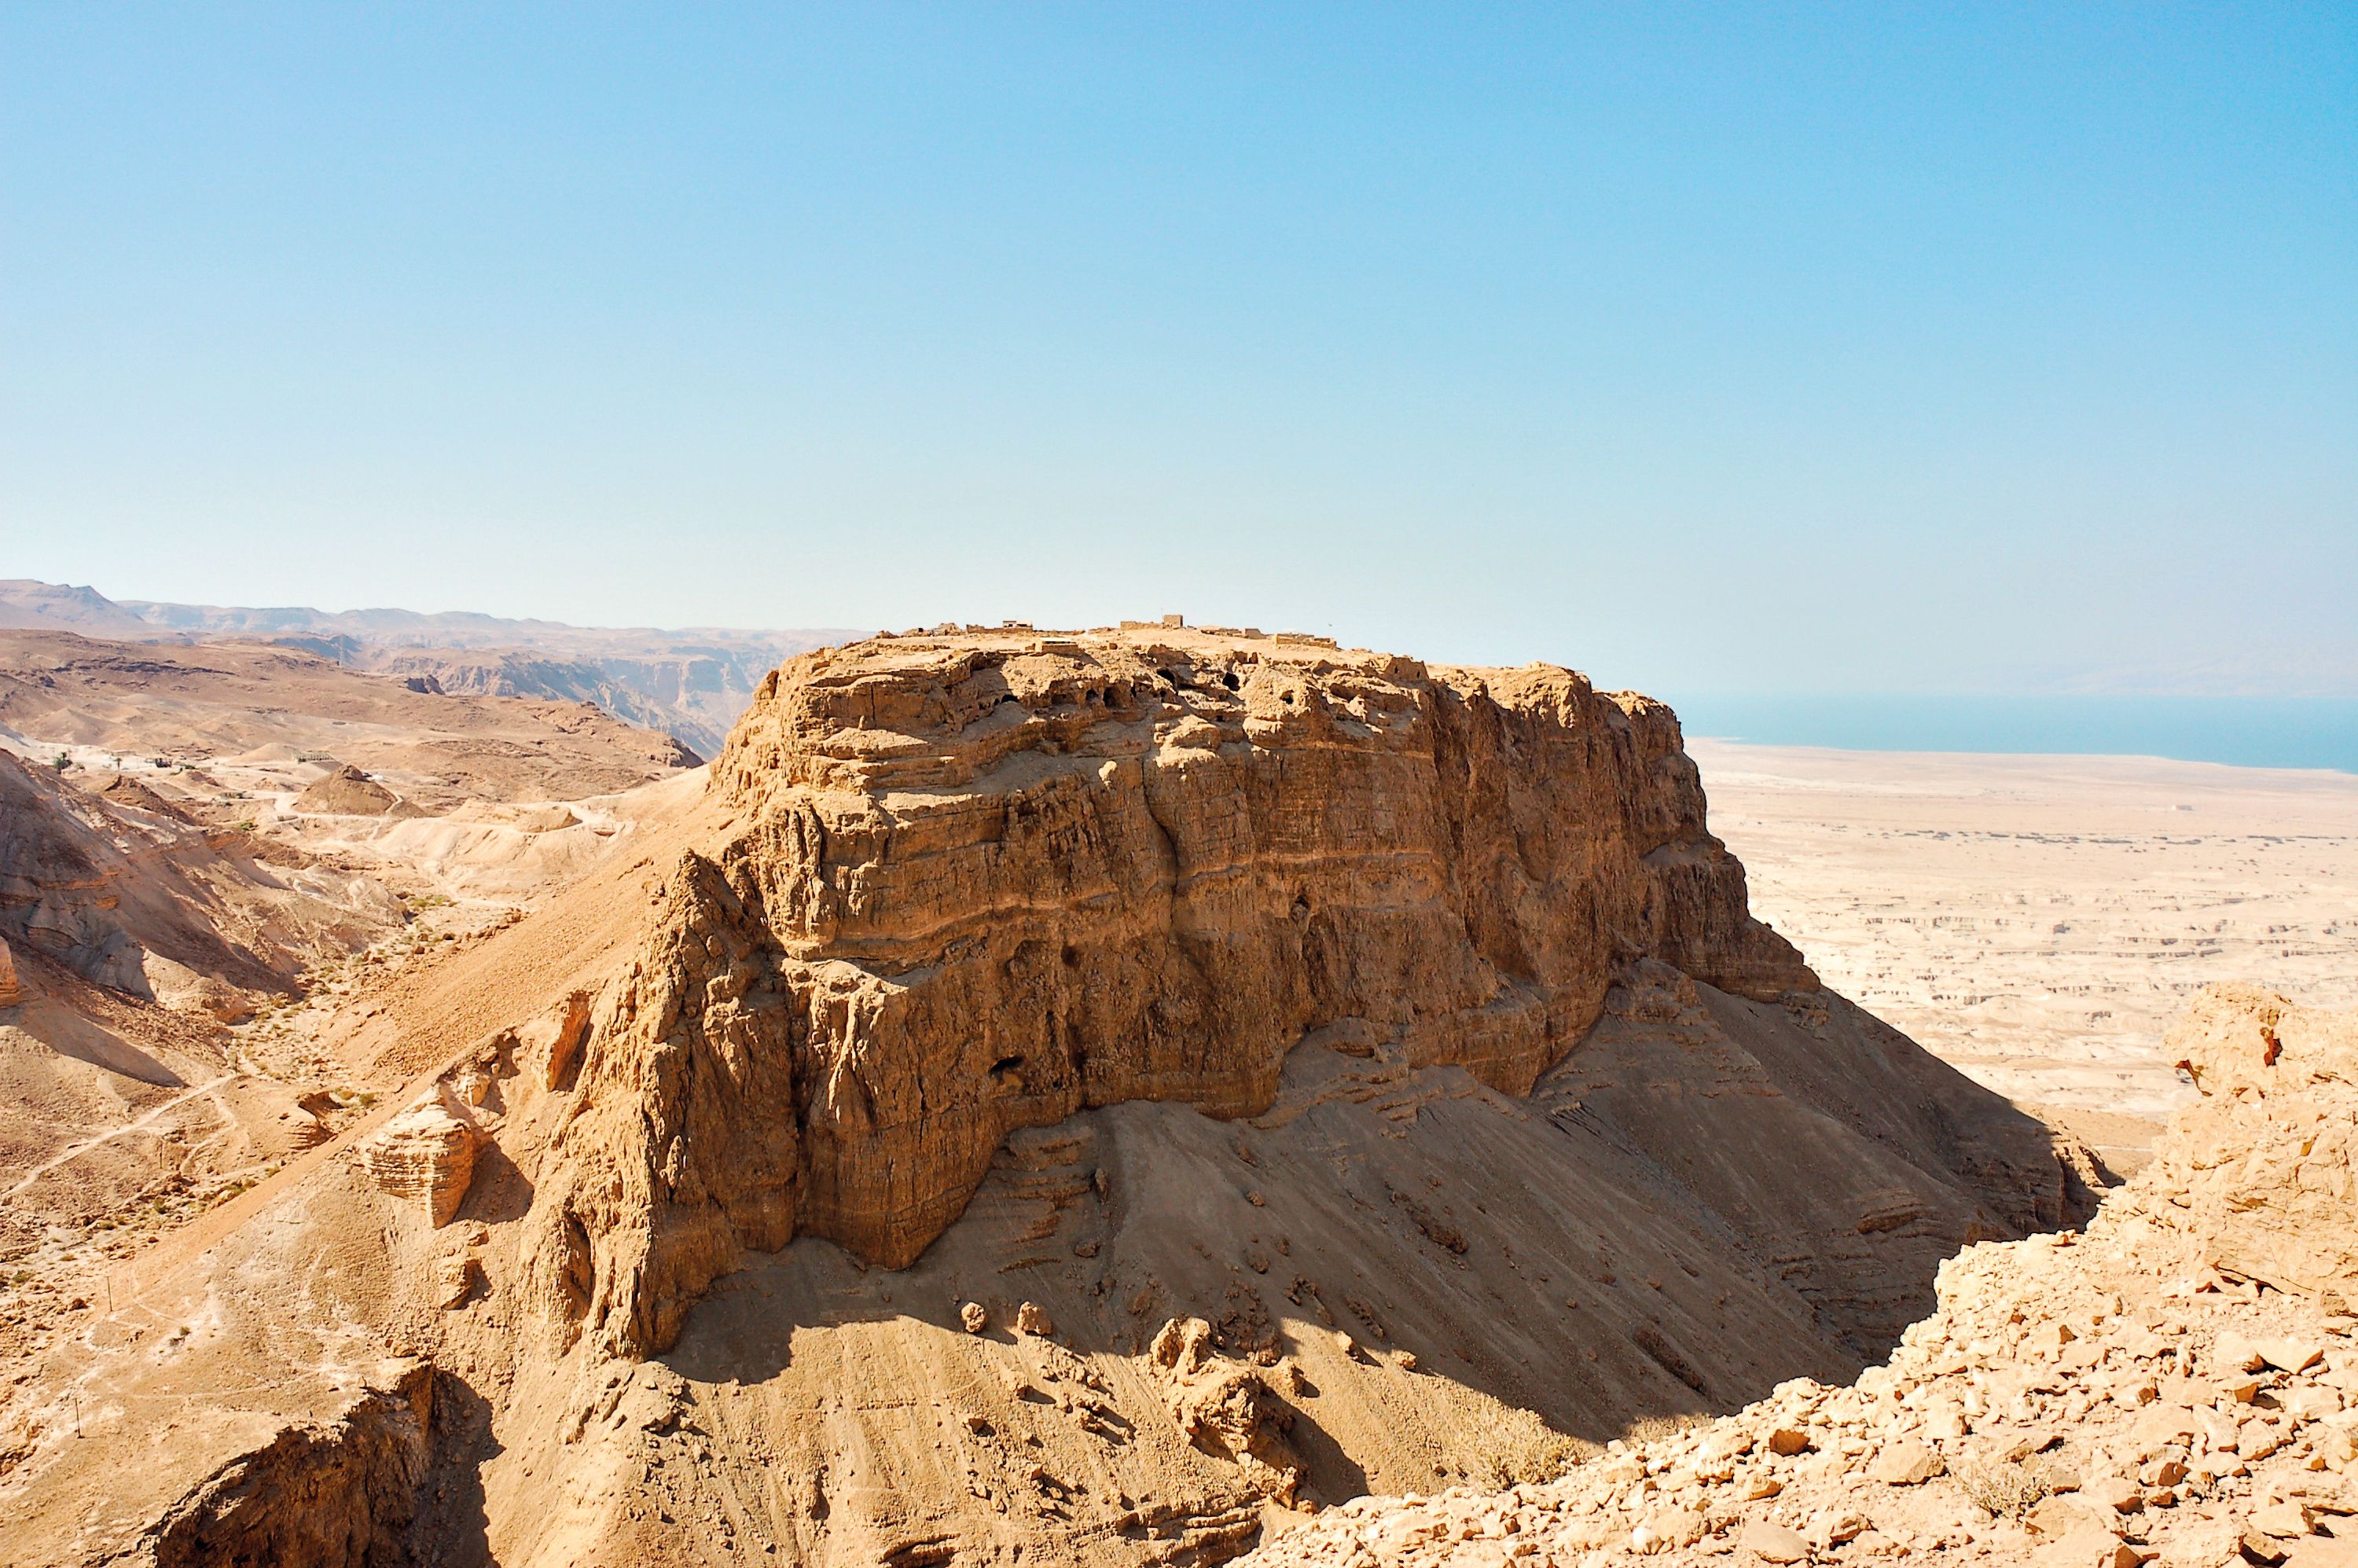 Scenic view of Masada stronghold, Dead Sea, Israel.